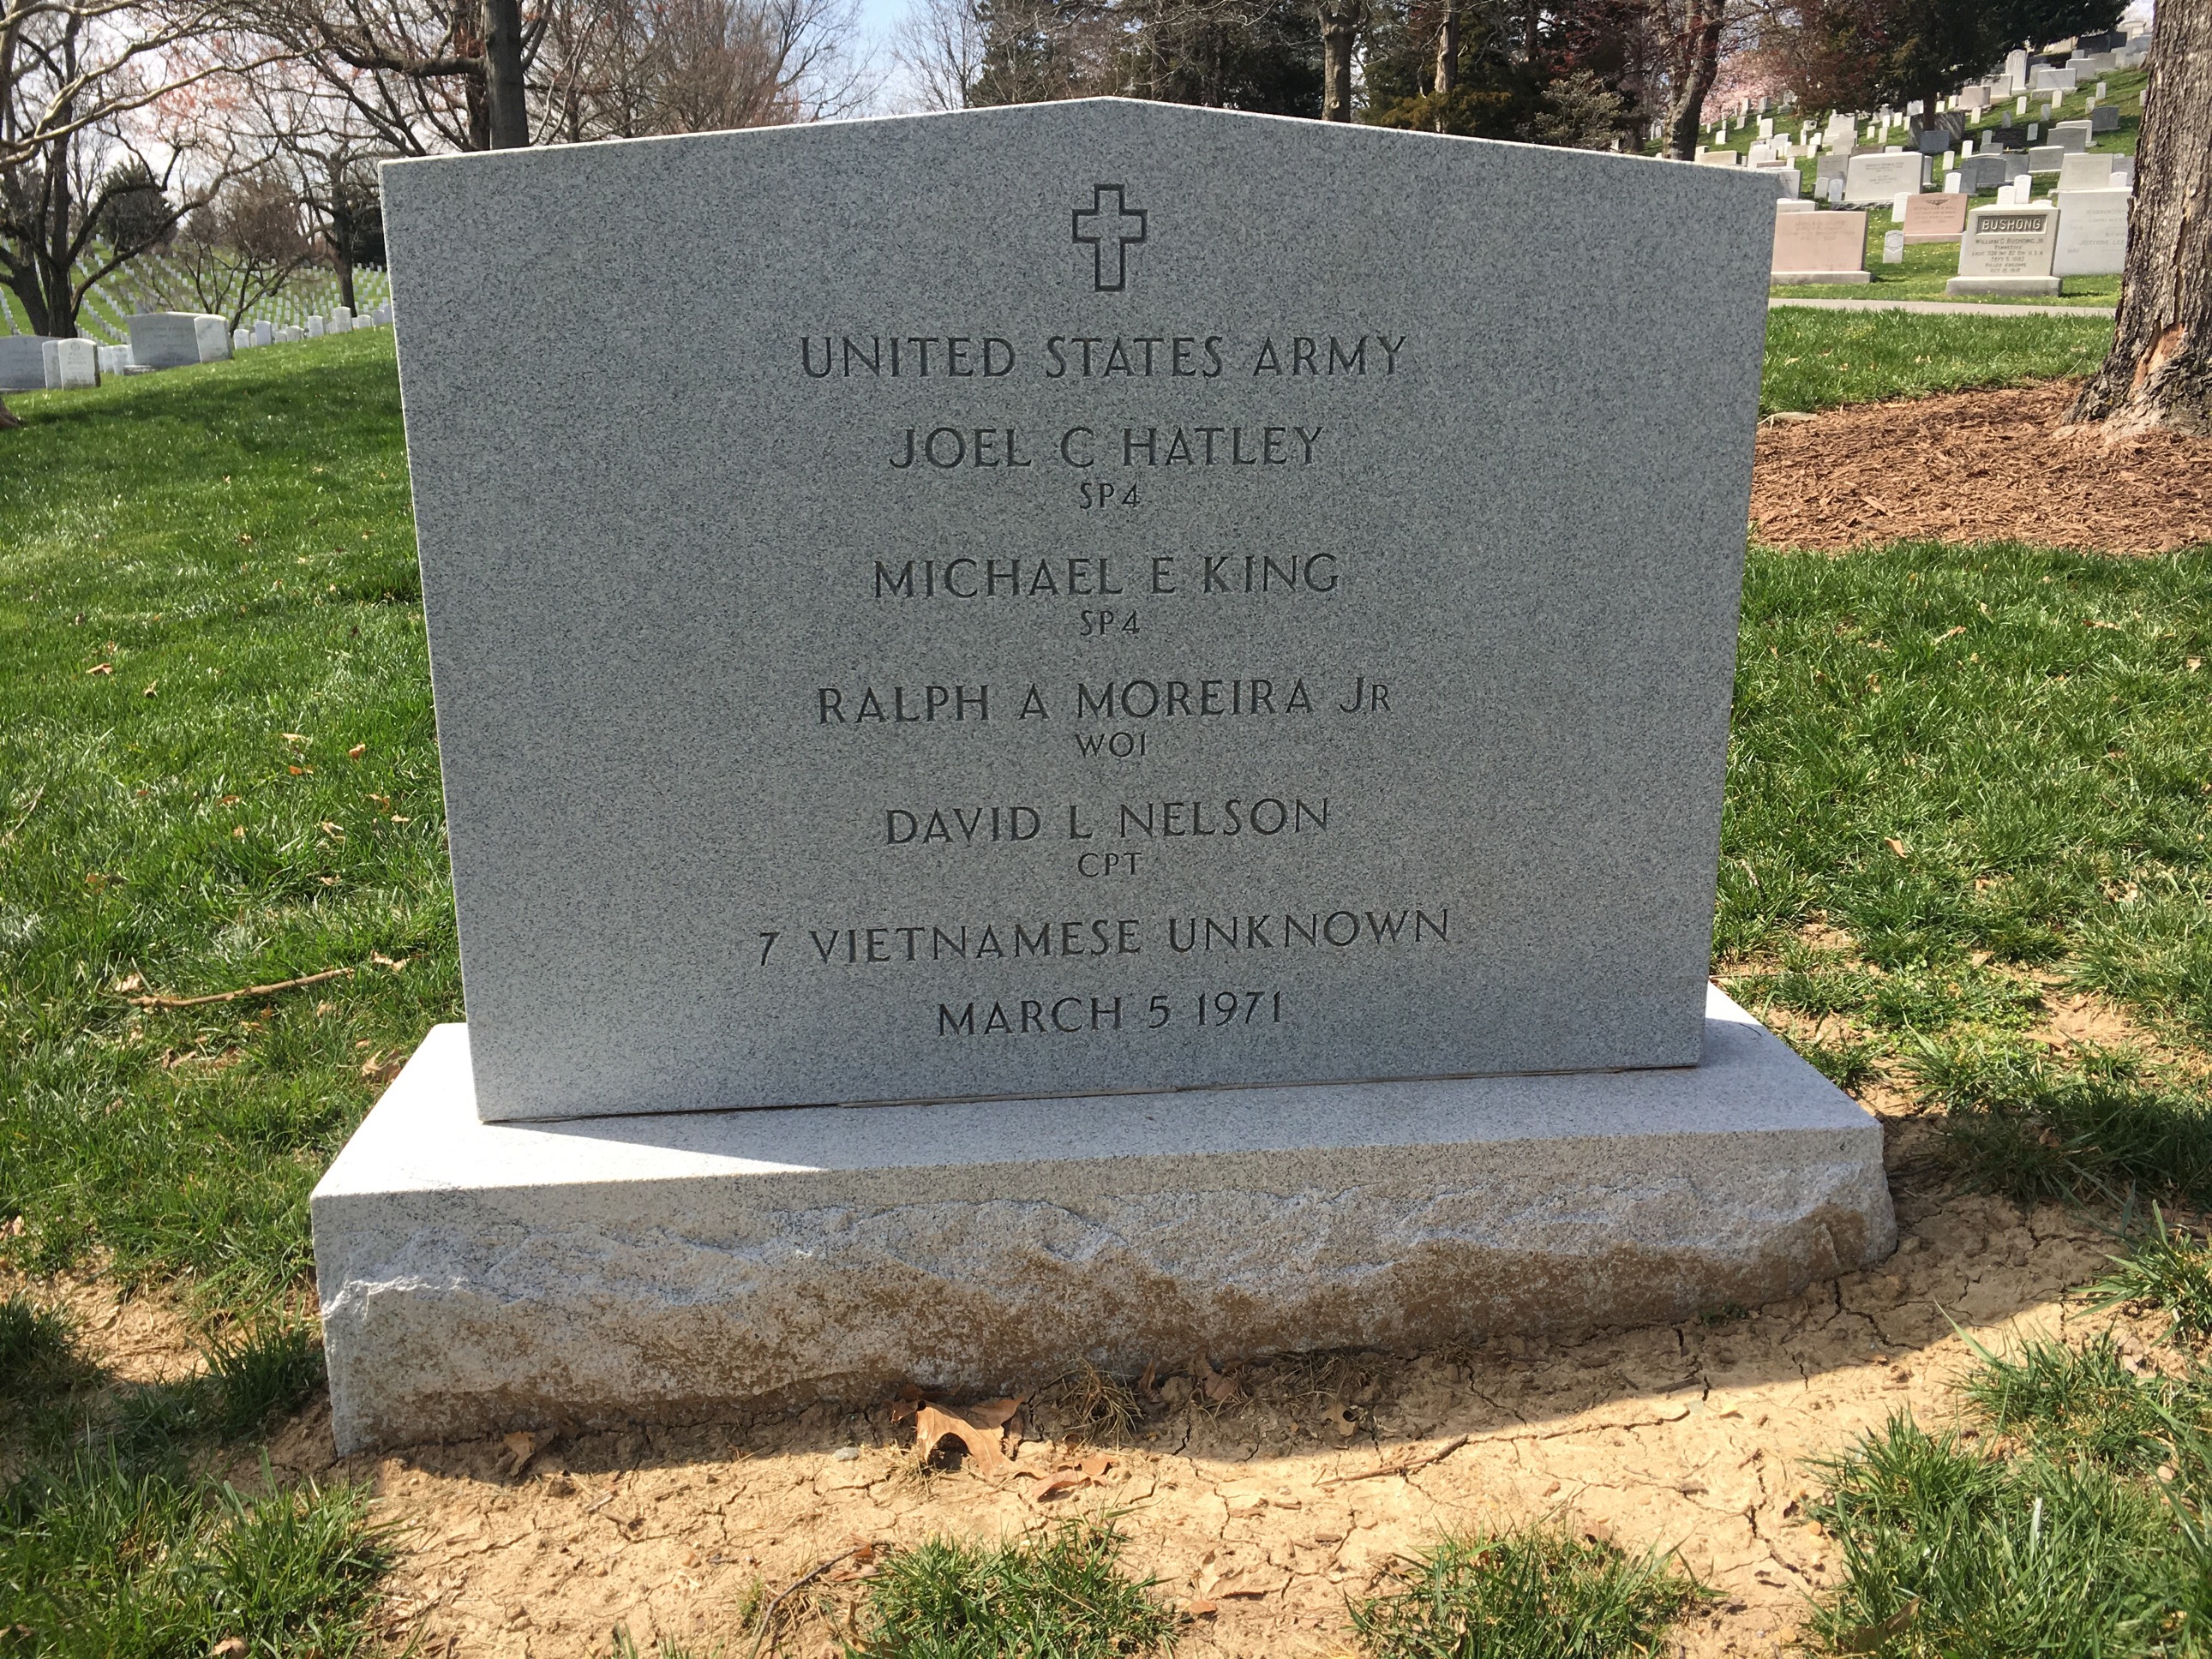 Headstone for a group burial that includes seven unknown South Vietnamese service members